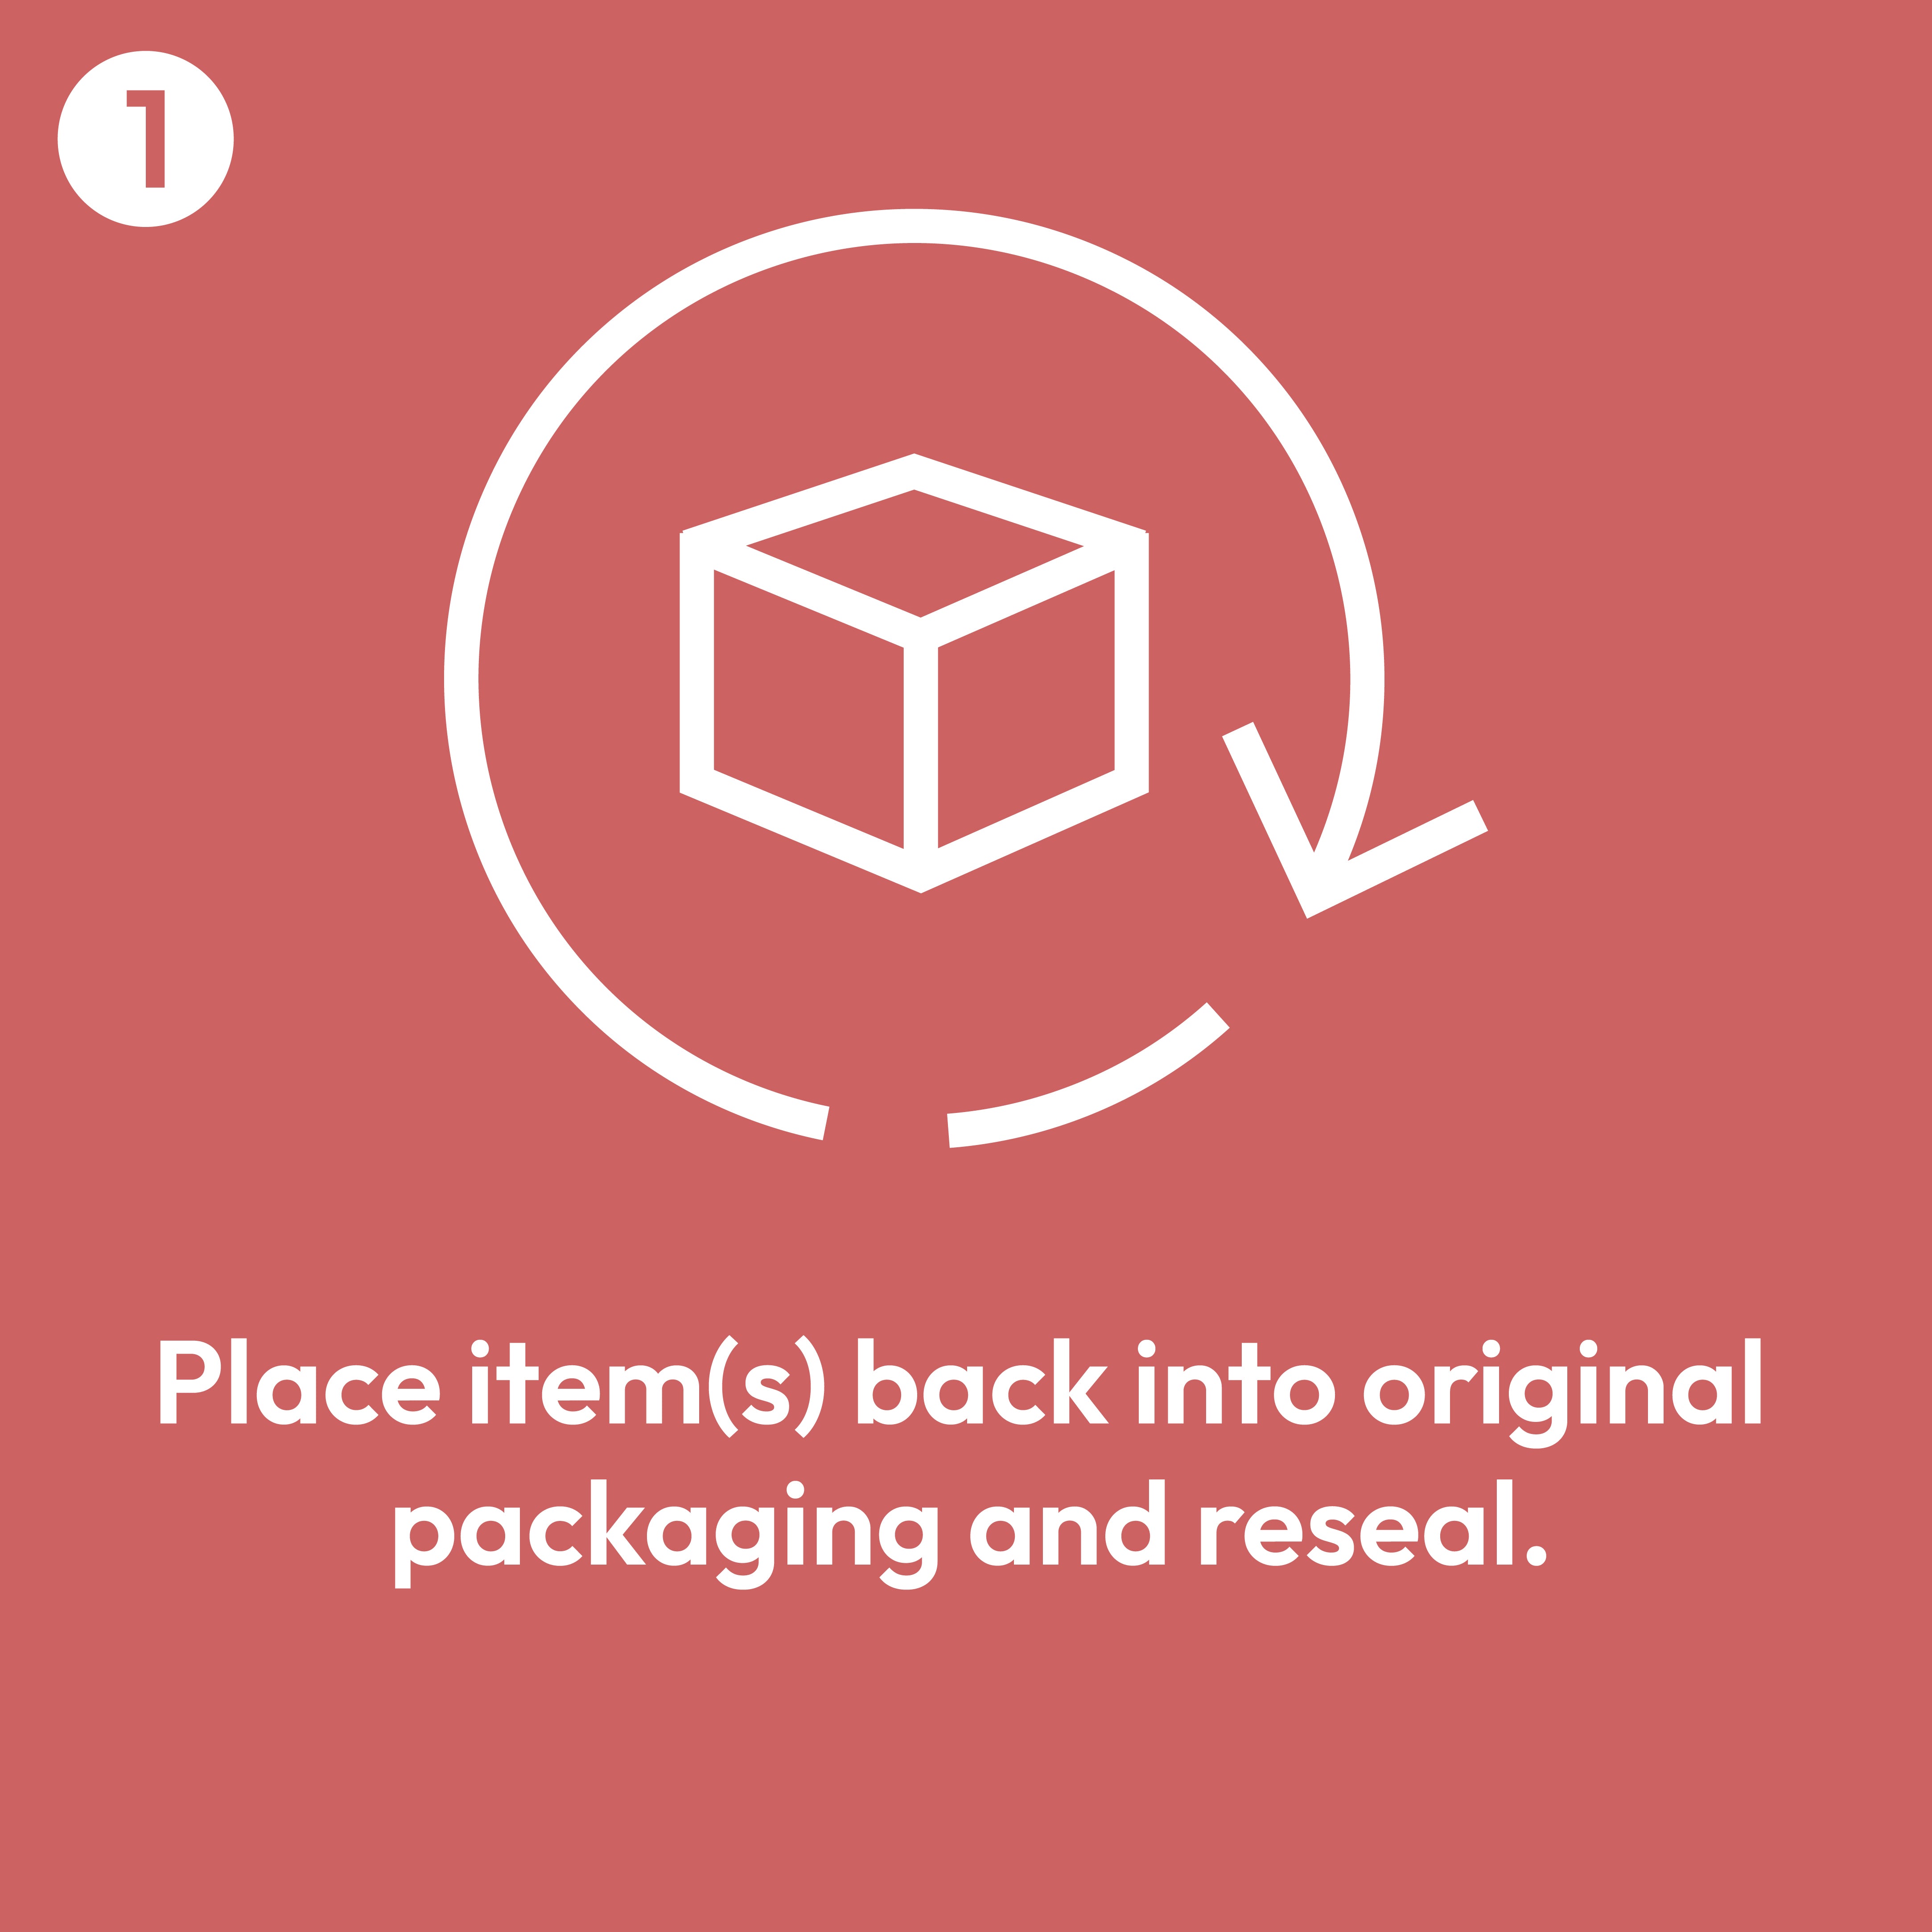 Place items back into original packaging